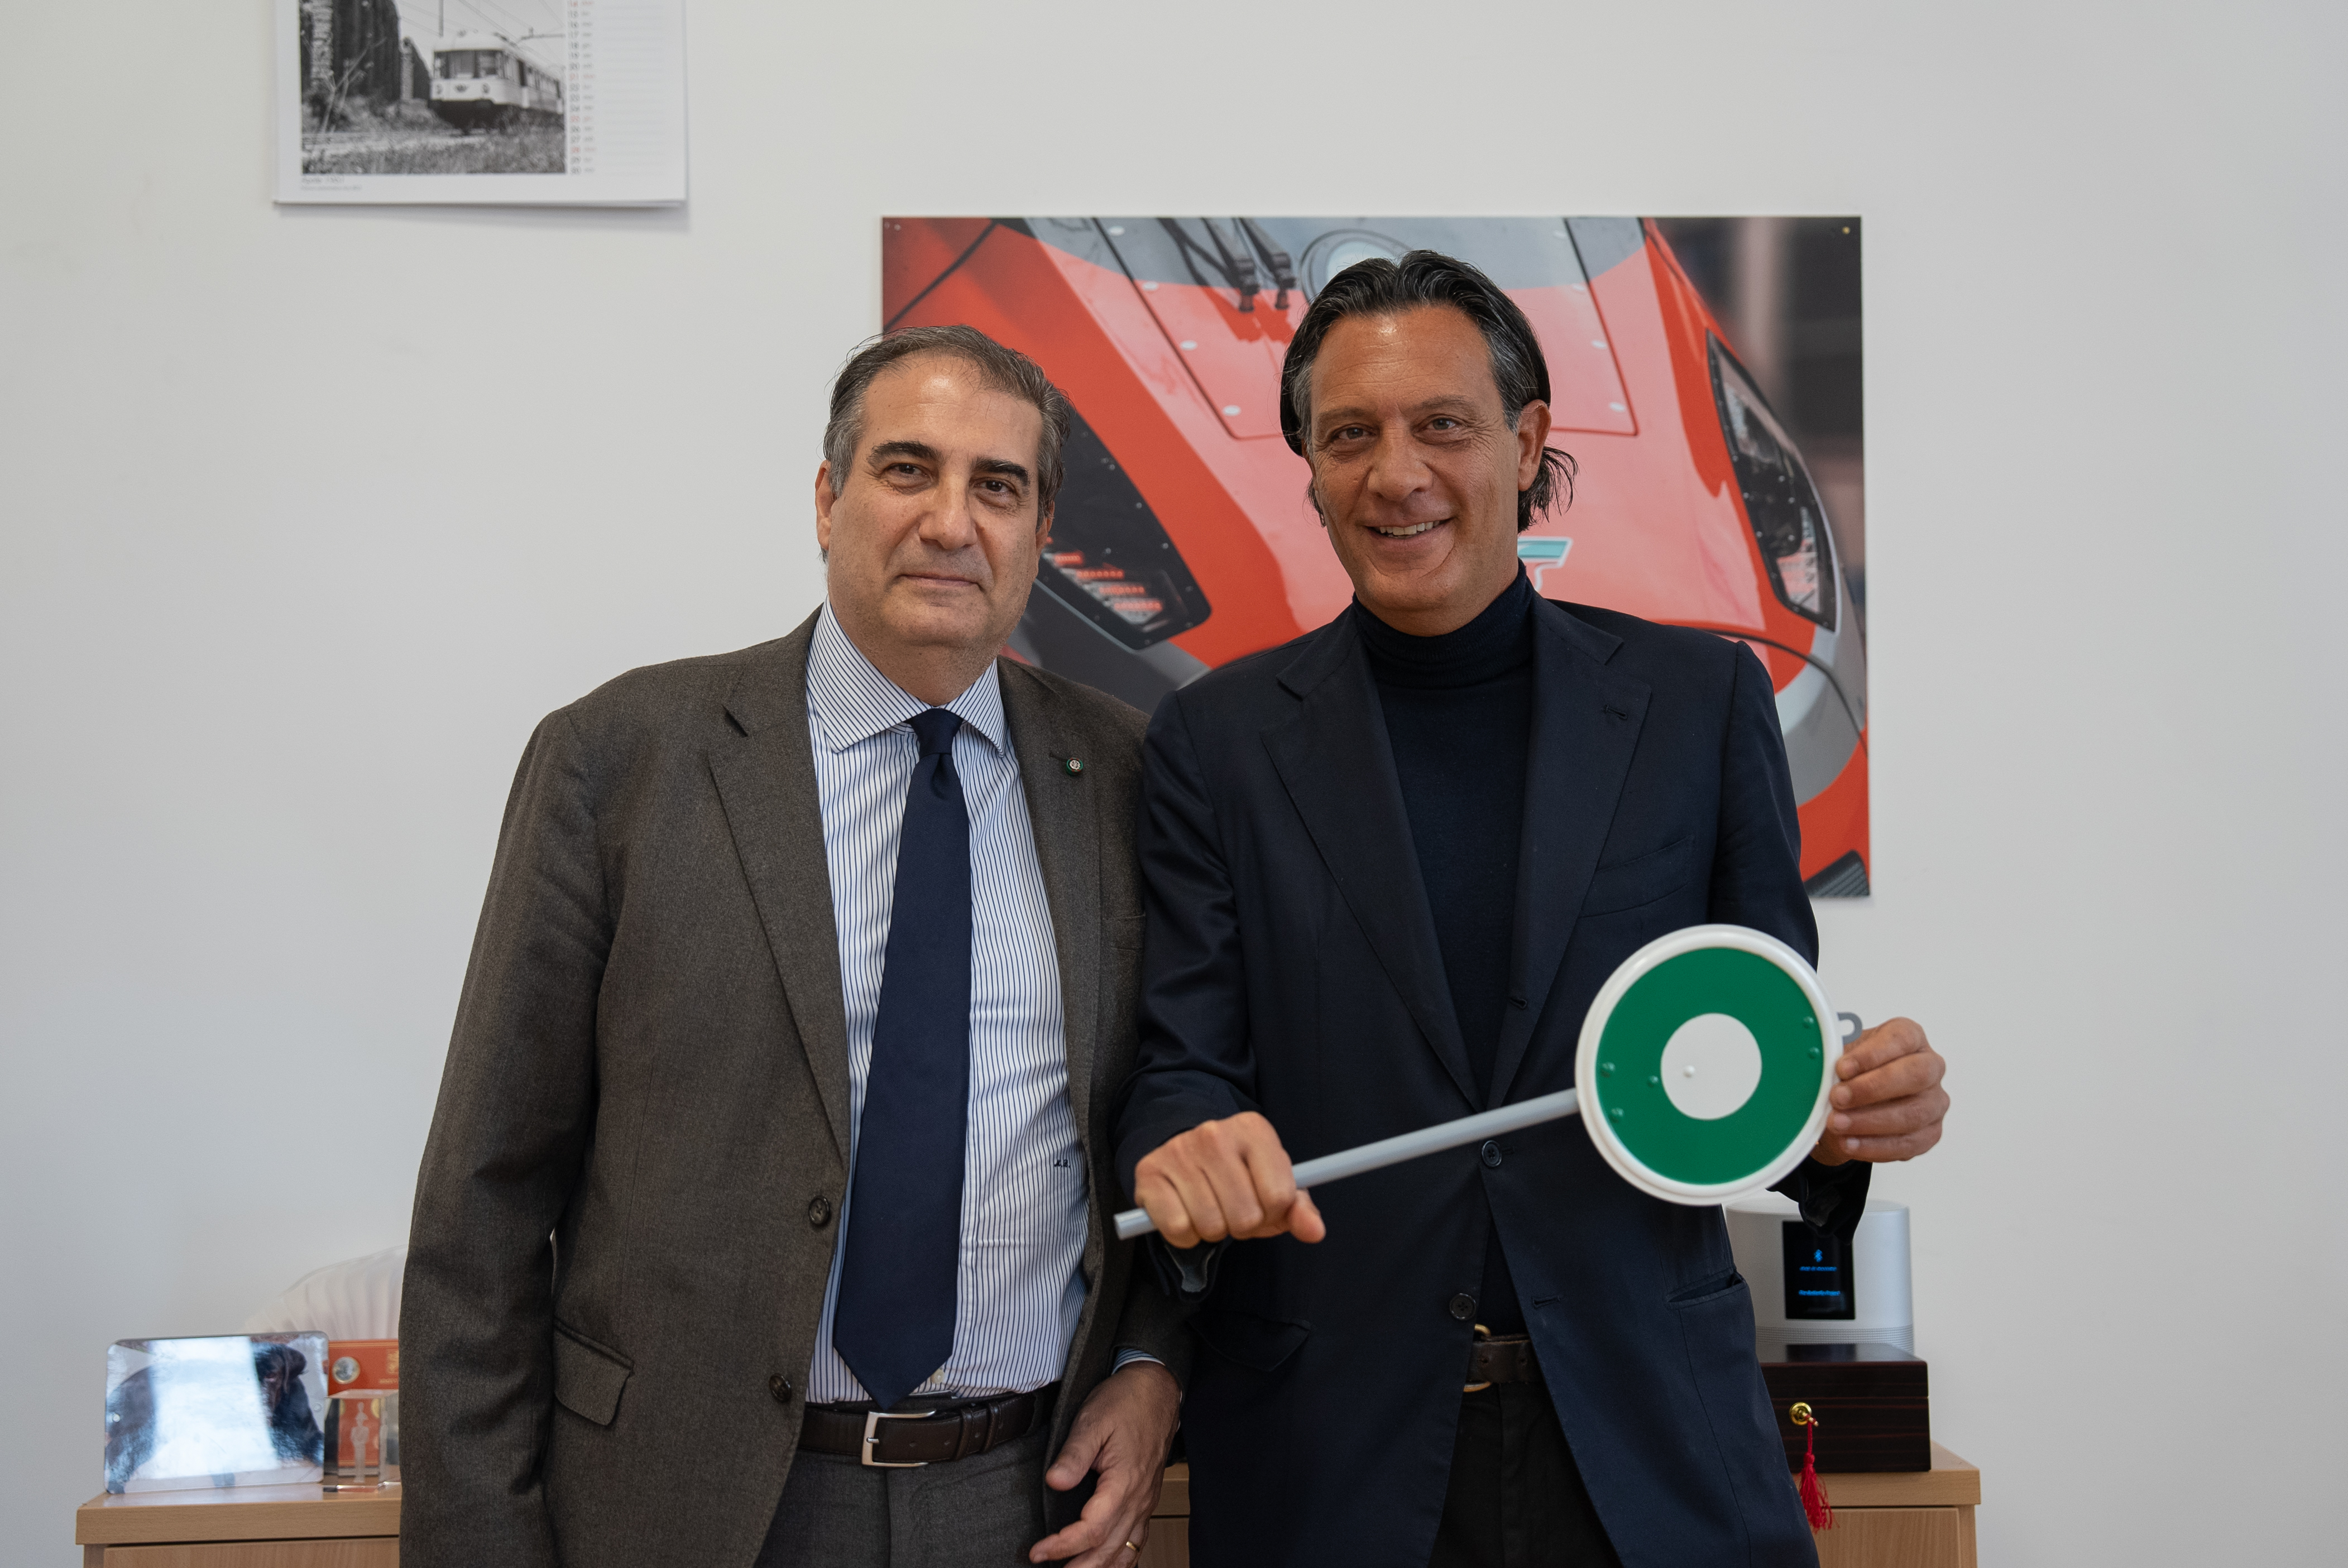 “Territorial stations”.  Memorandum of understanding between Ferrovie dello Stato and Sport e Salute for the redevelopment project of abandoned stations